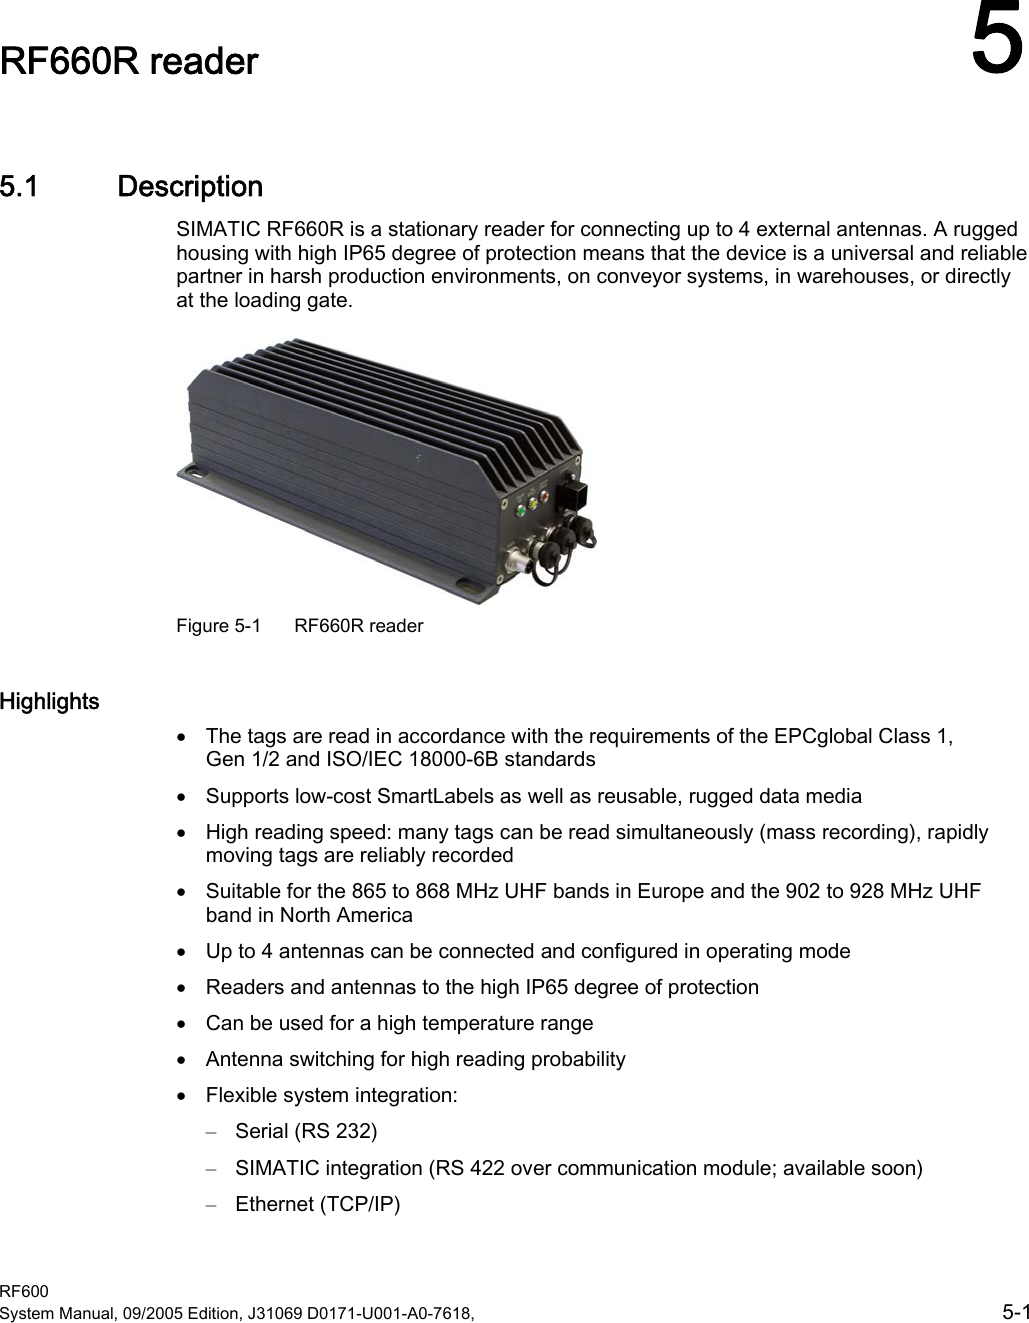  RF600 System Manual, 09/2005 Edition, J31069 D0171-U001-A0-7618,    5-1 RF660R reader  55.1 Description SIMATIC RF660R is a stationary reader for connecting up to 4 external antennas. A rugged housing with high IP65 degree of protection means that the device is a universal and reliable partner in harsh production environments, on conveyor systems, in warehouses, or directly at the loading gate.  Figure 5-1  RF660R reader Highlights • The tags are read in accordance with the requirements of the EPCglobal Class 1, Gen 1/2 and ISO/IEC 18000-6B standards • Supports low-cost SmartLabels as well as reusable, rugged data media • High reading speed: many tags can be read simultaneously (mass recording), rapidly moving tags are reliably recorded • Suitable for the 865 to 868 MHz UHF bands in Europe and the 902 to 928 MHz UHF band in North America • Up to 4 antennas can be connected and configured in operating mode • Readers and antennas to the high IP65 degree of protection • Can be used for a high temperature range • Antenna switching for high reading probability • Flexible system integration: – Serial (RS 232) – SIMATIC integration (RS 422 over communication module; available soon) – Ethernet (TCP/IP) 